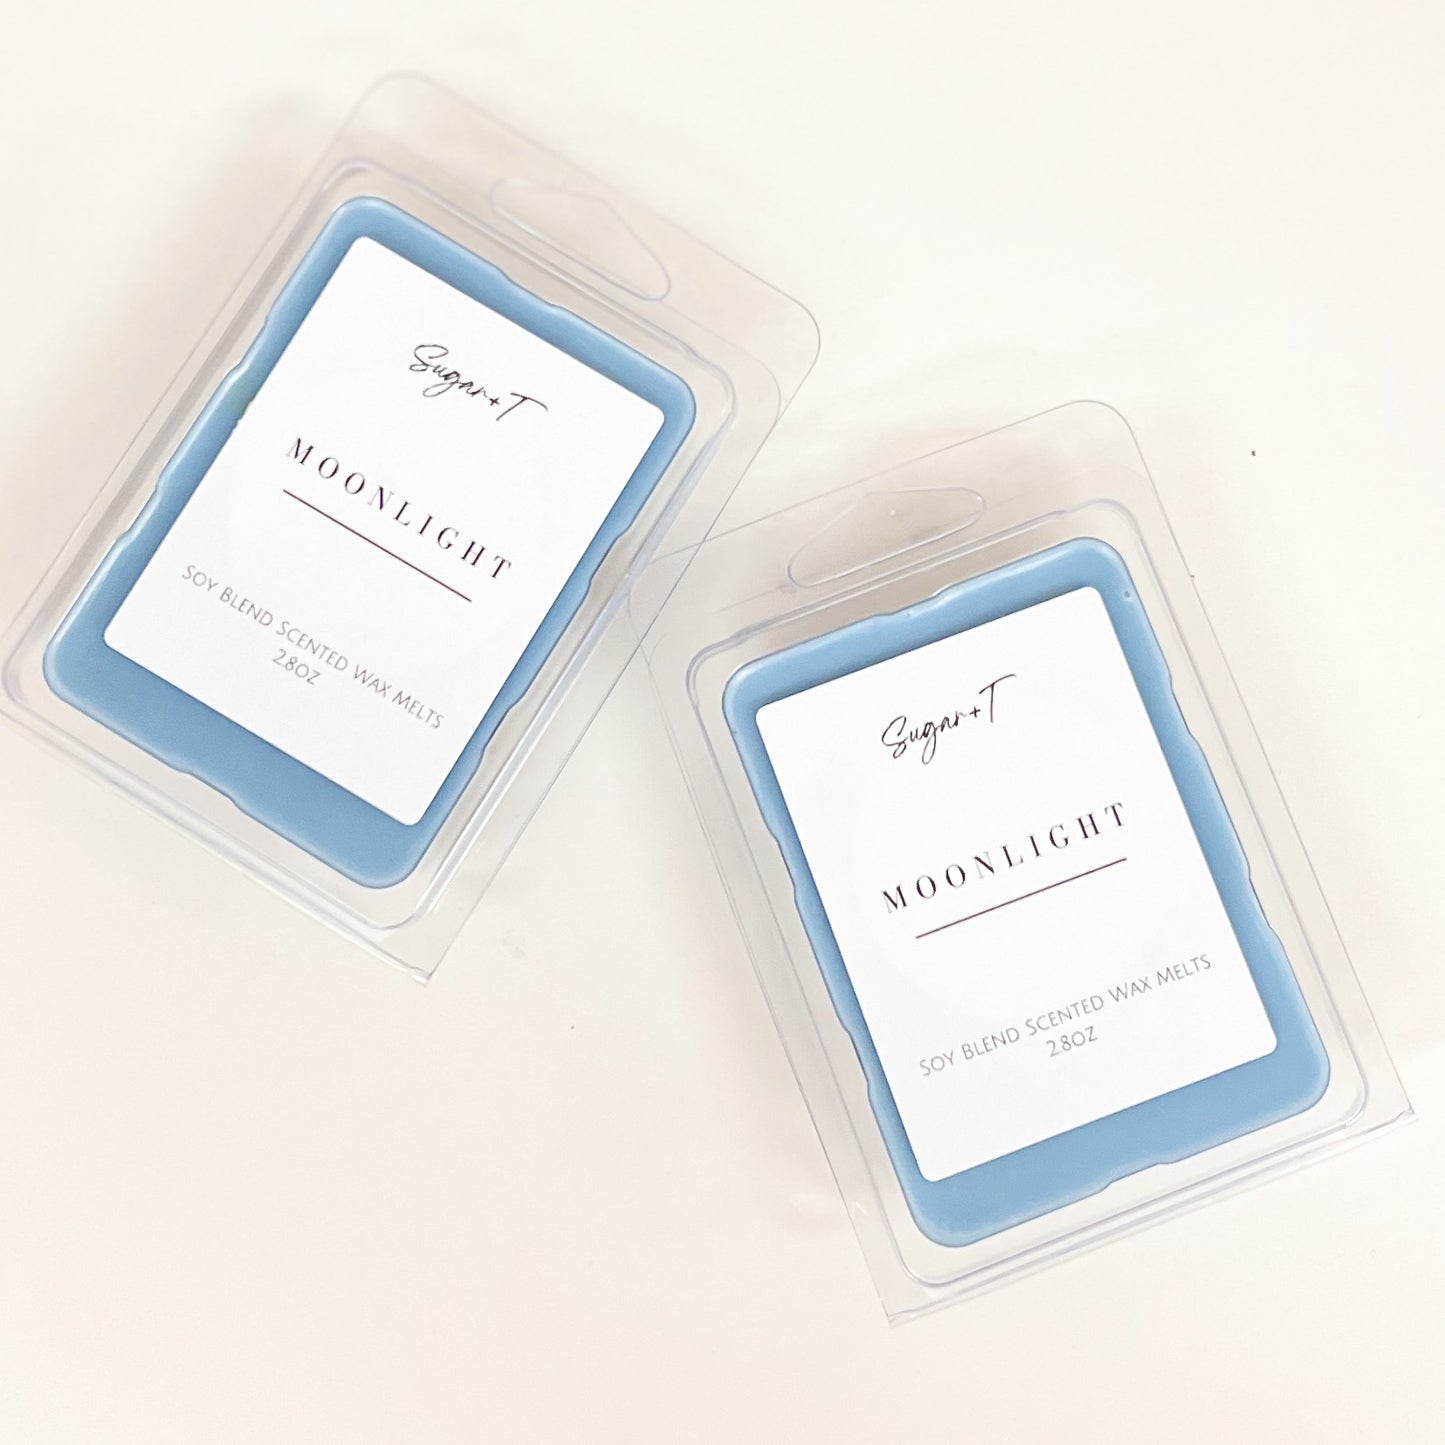 Moonlight Scented Wax Melts